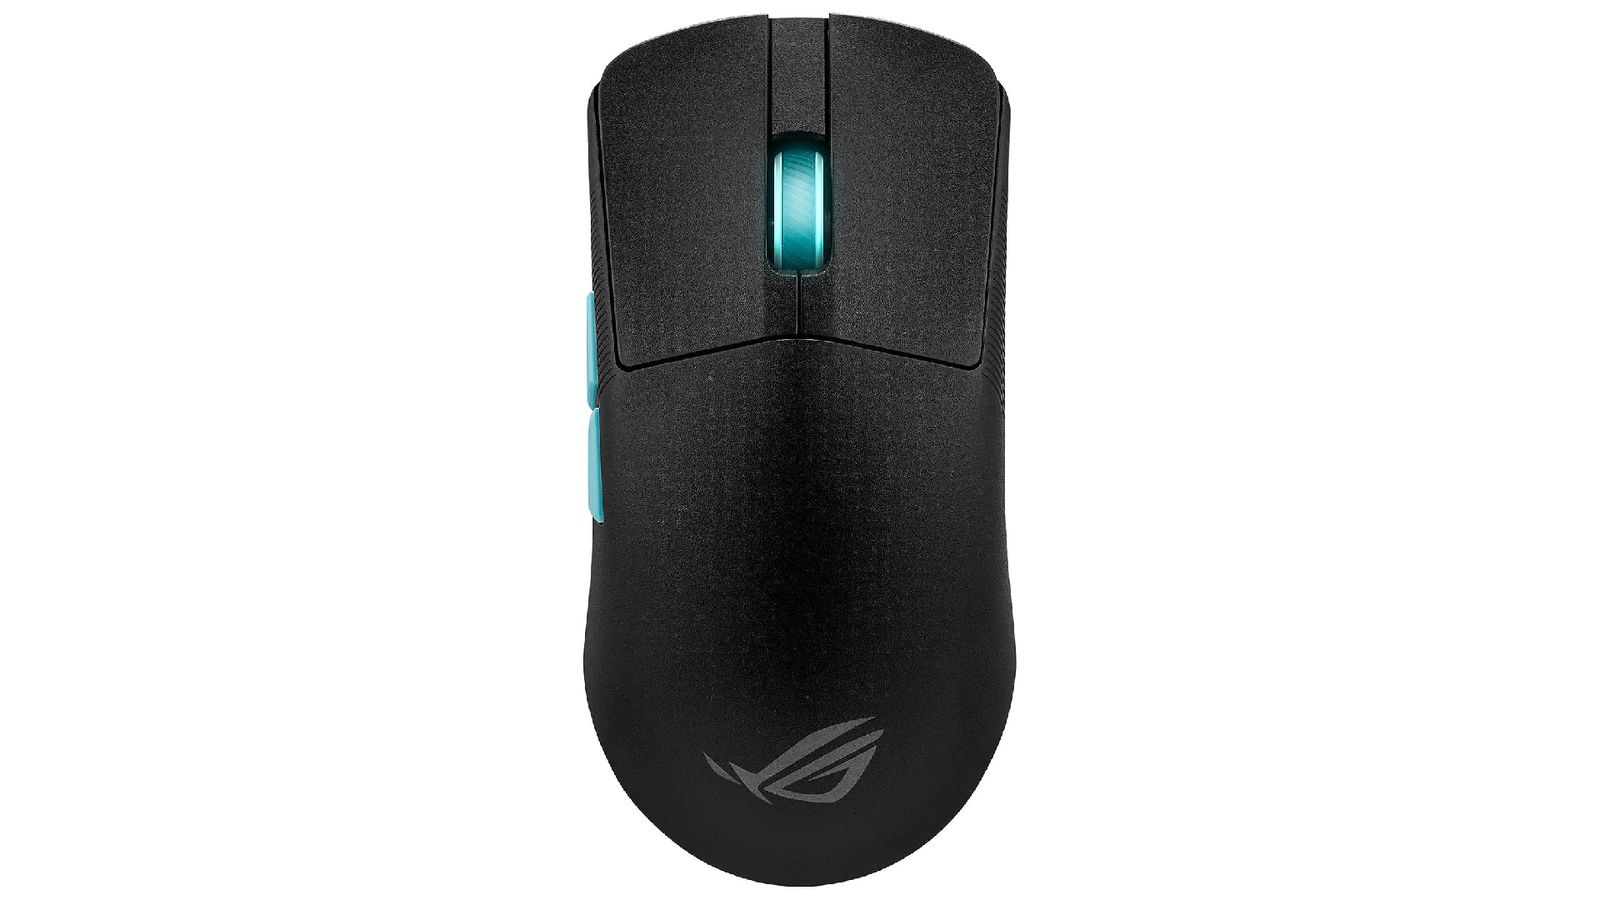 ASUS ROG Harpe Ace product image of a black mouse with a blue scroll wheel and side buttons.